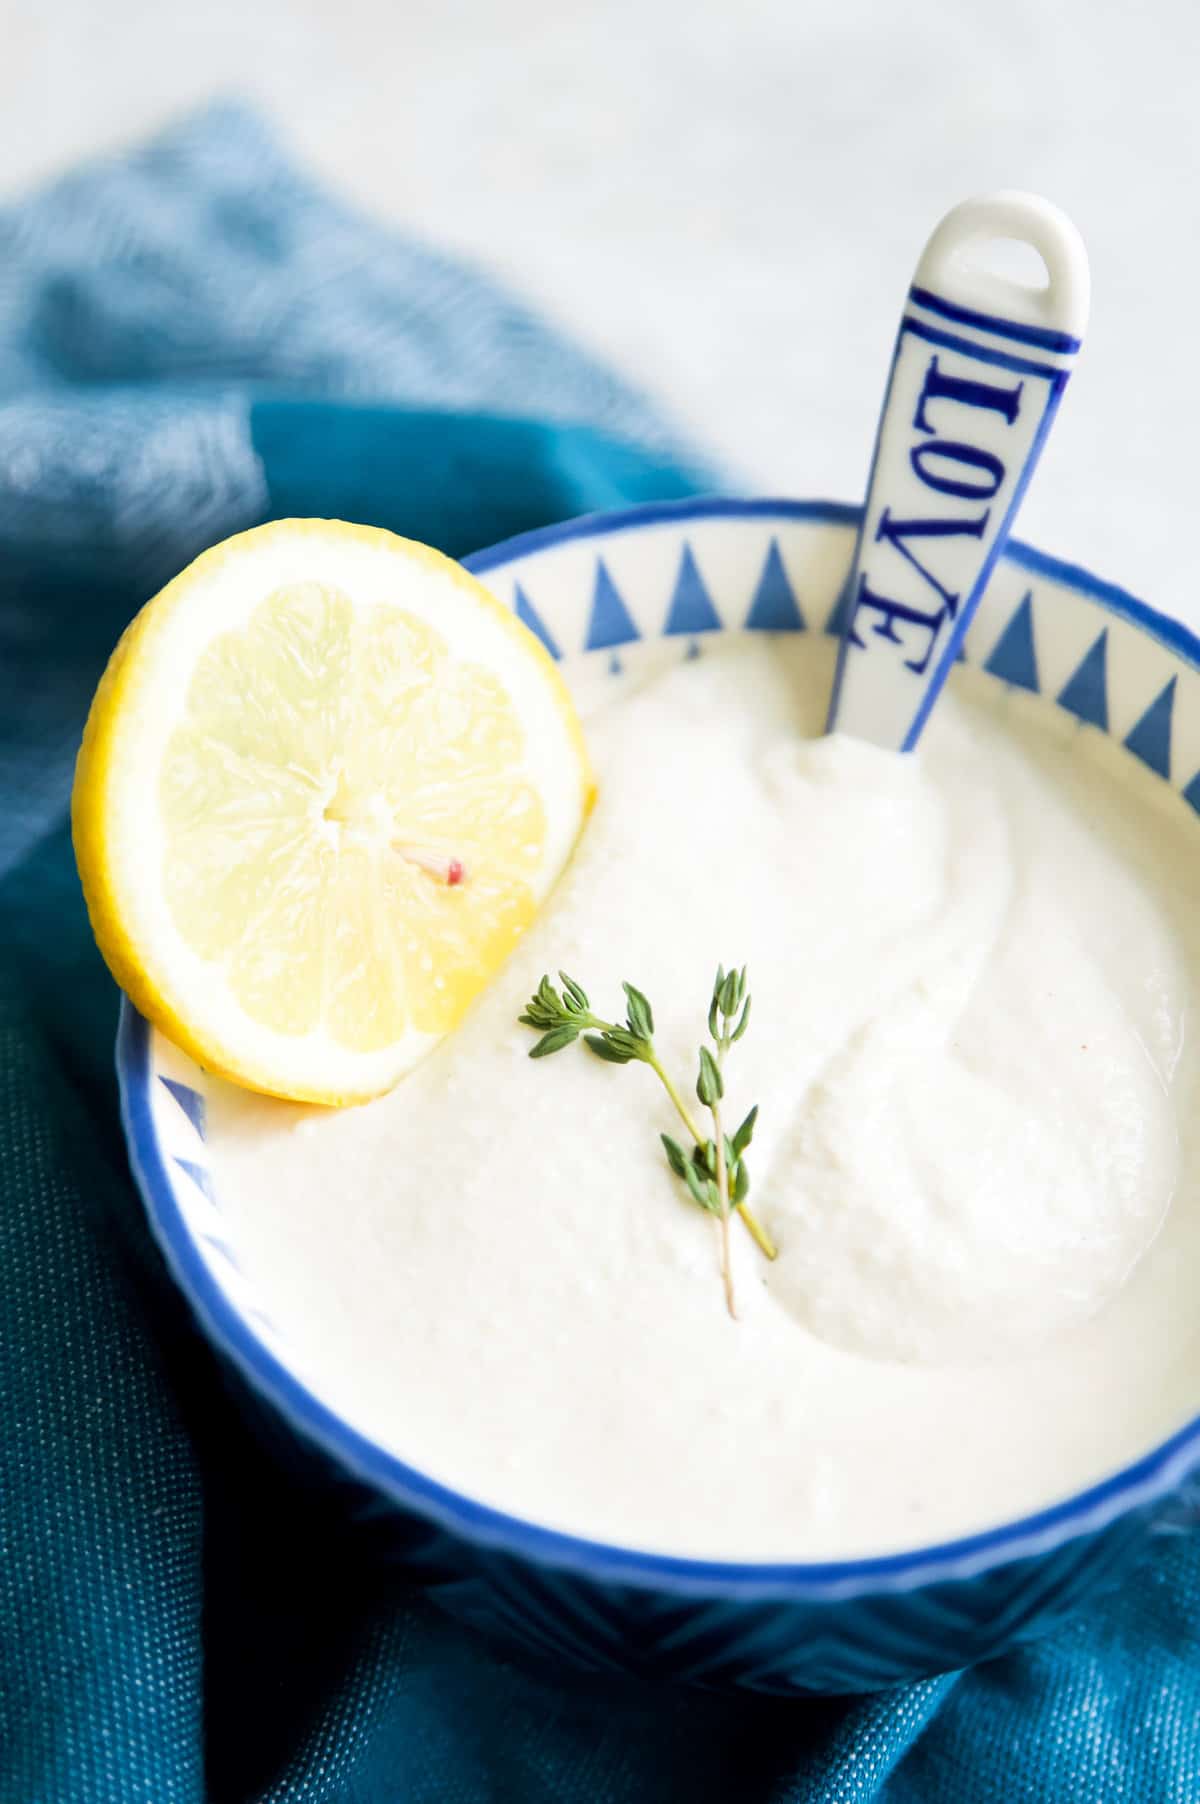 A bowl of dairy free sour cream with a lemon slice and a spoon.
